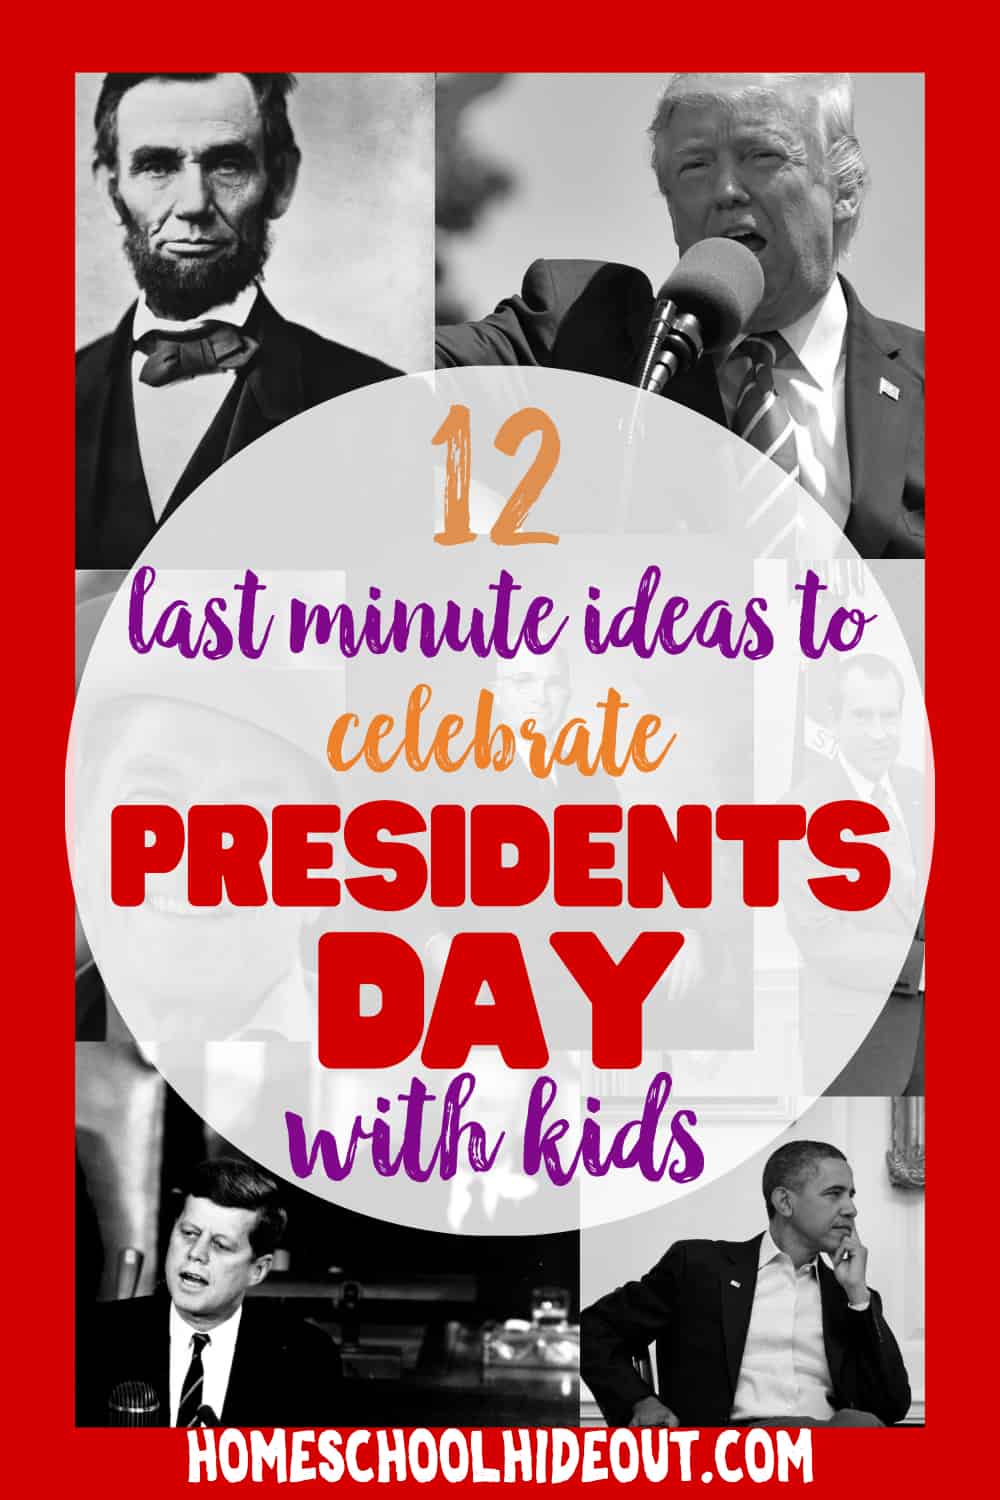 This was so fun and I had the supplies on hand! YAY. Activities, crafts and silly facts to celebrate Presidents Day with your littles. #presidentsday #february #presidents #celebrate #USA